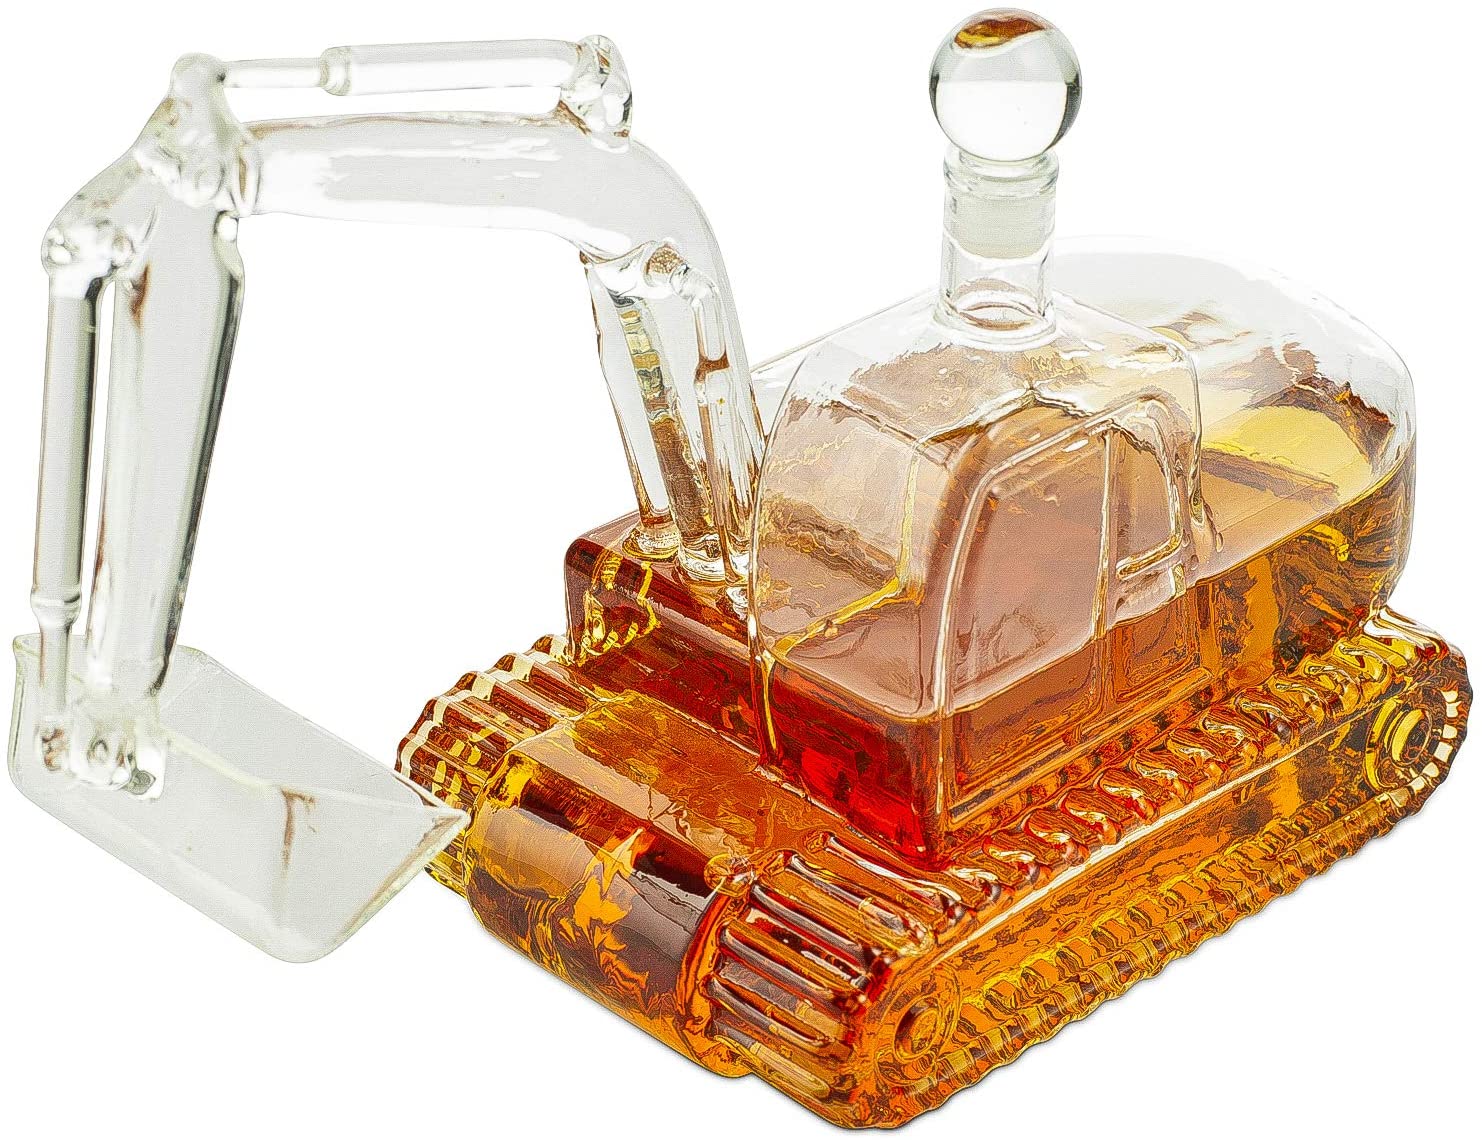 A construction tractor whiskey decanter